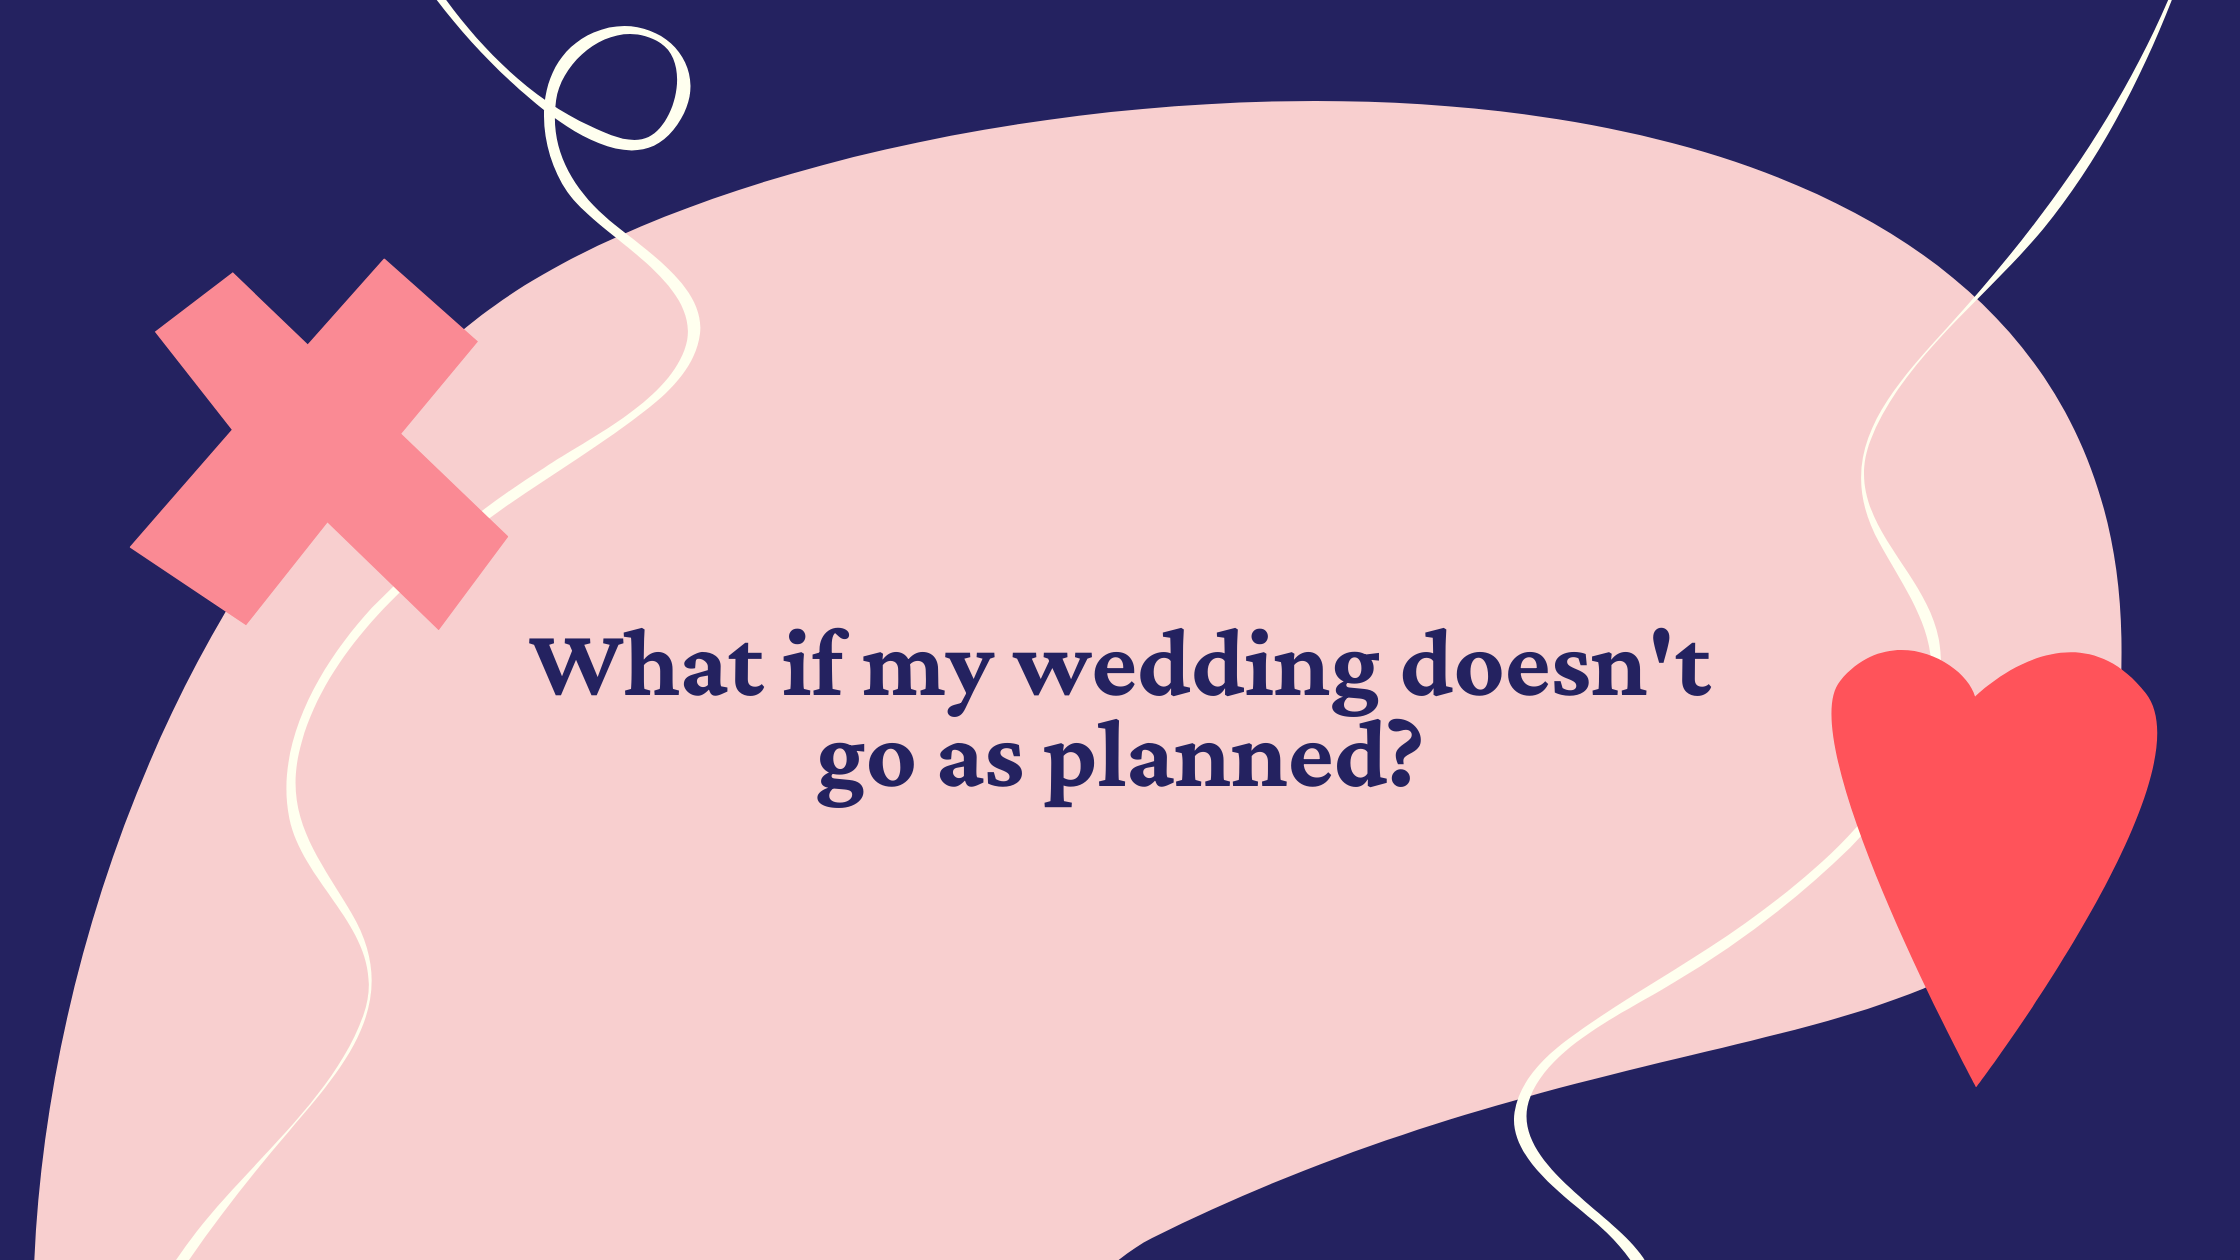 What if my wedding doesn't go as planned?